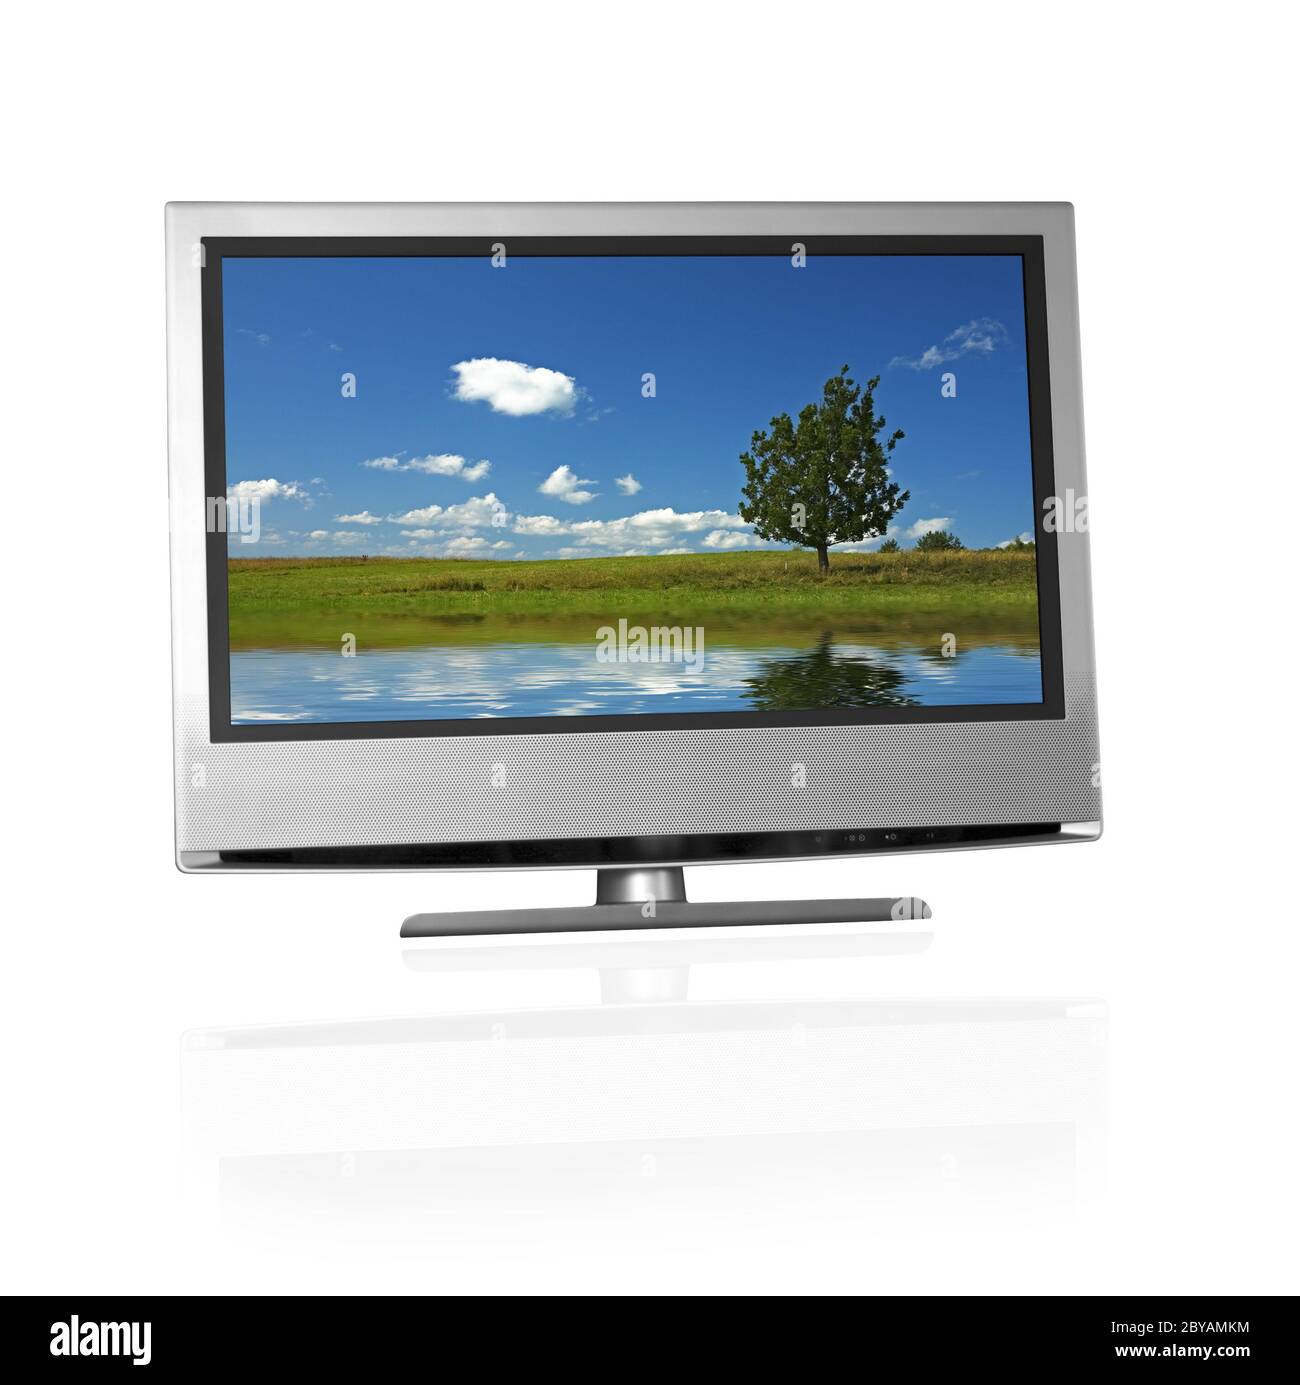 Sony television, flat screen, high definition Stock Photo - Alamy